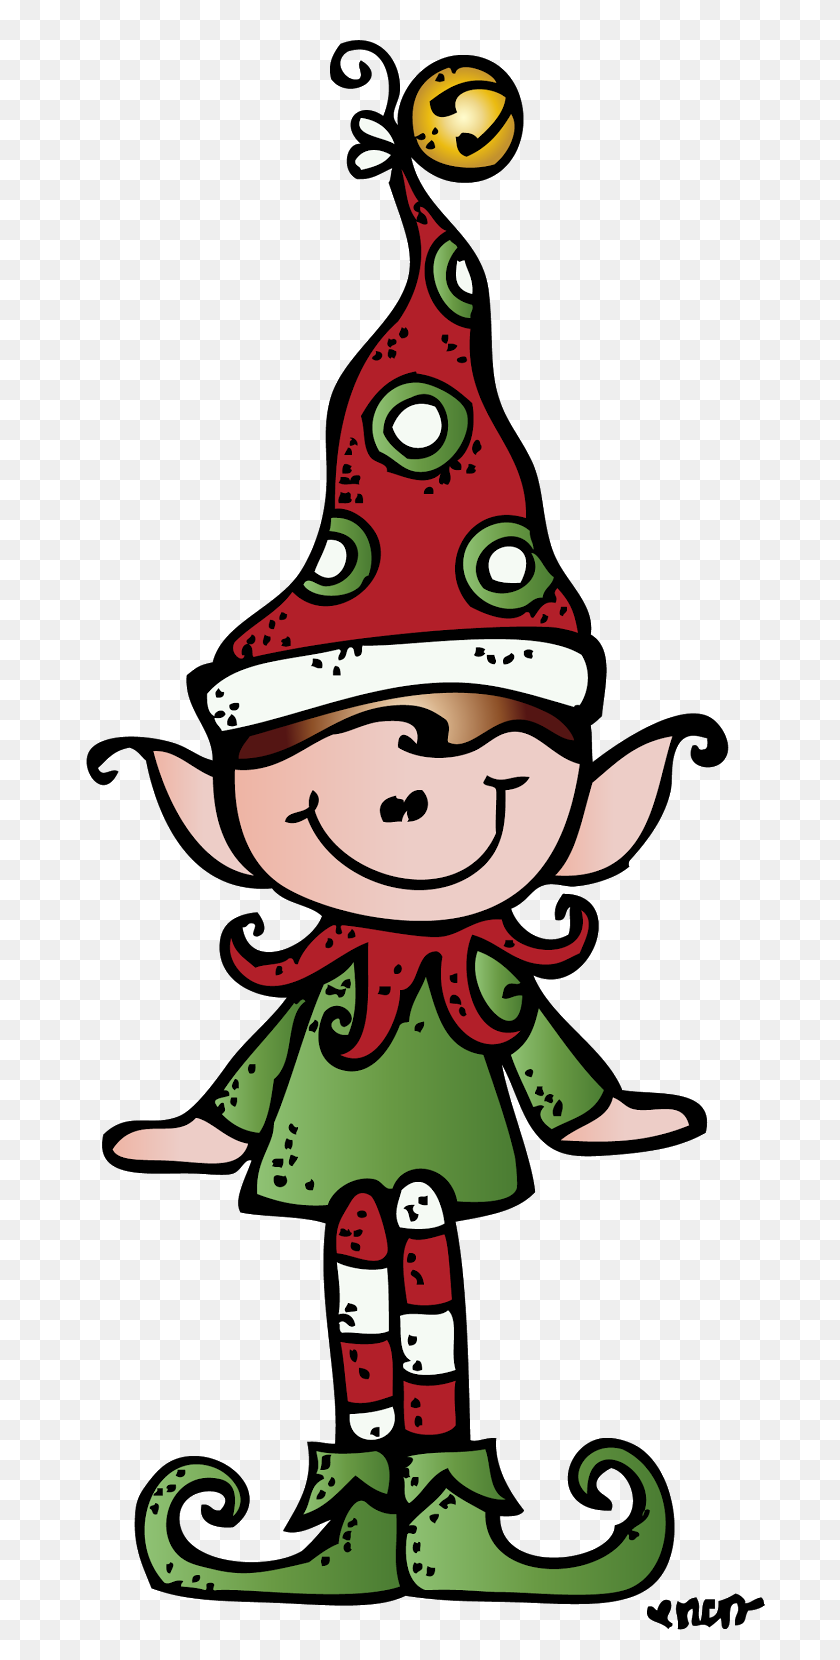 690x1600 Elf On The Shelf Clip Art Look At Elf On The Shelf Clip Art Clip - All Done Clipart